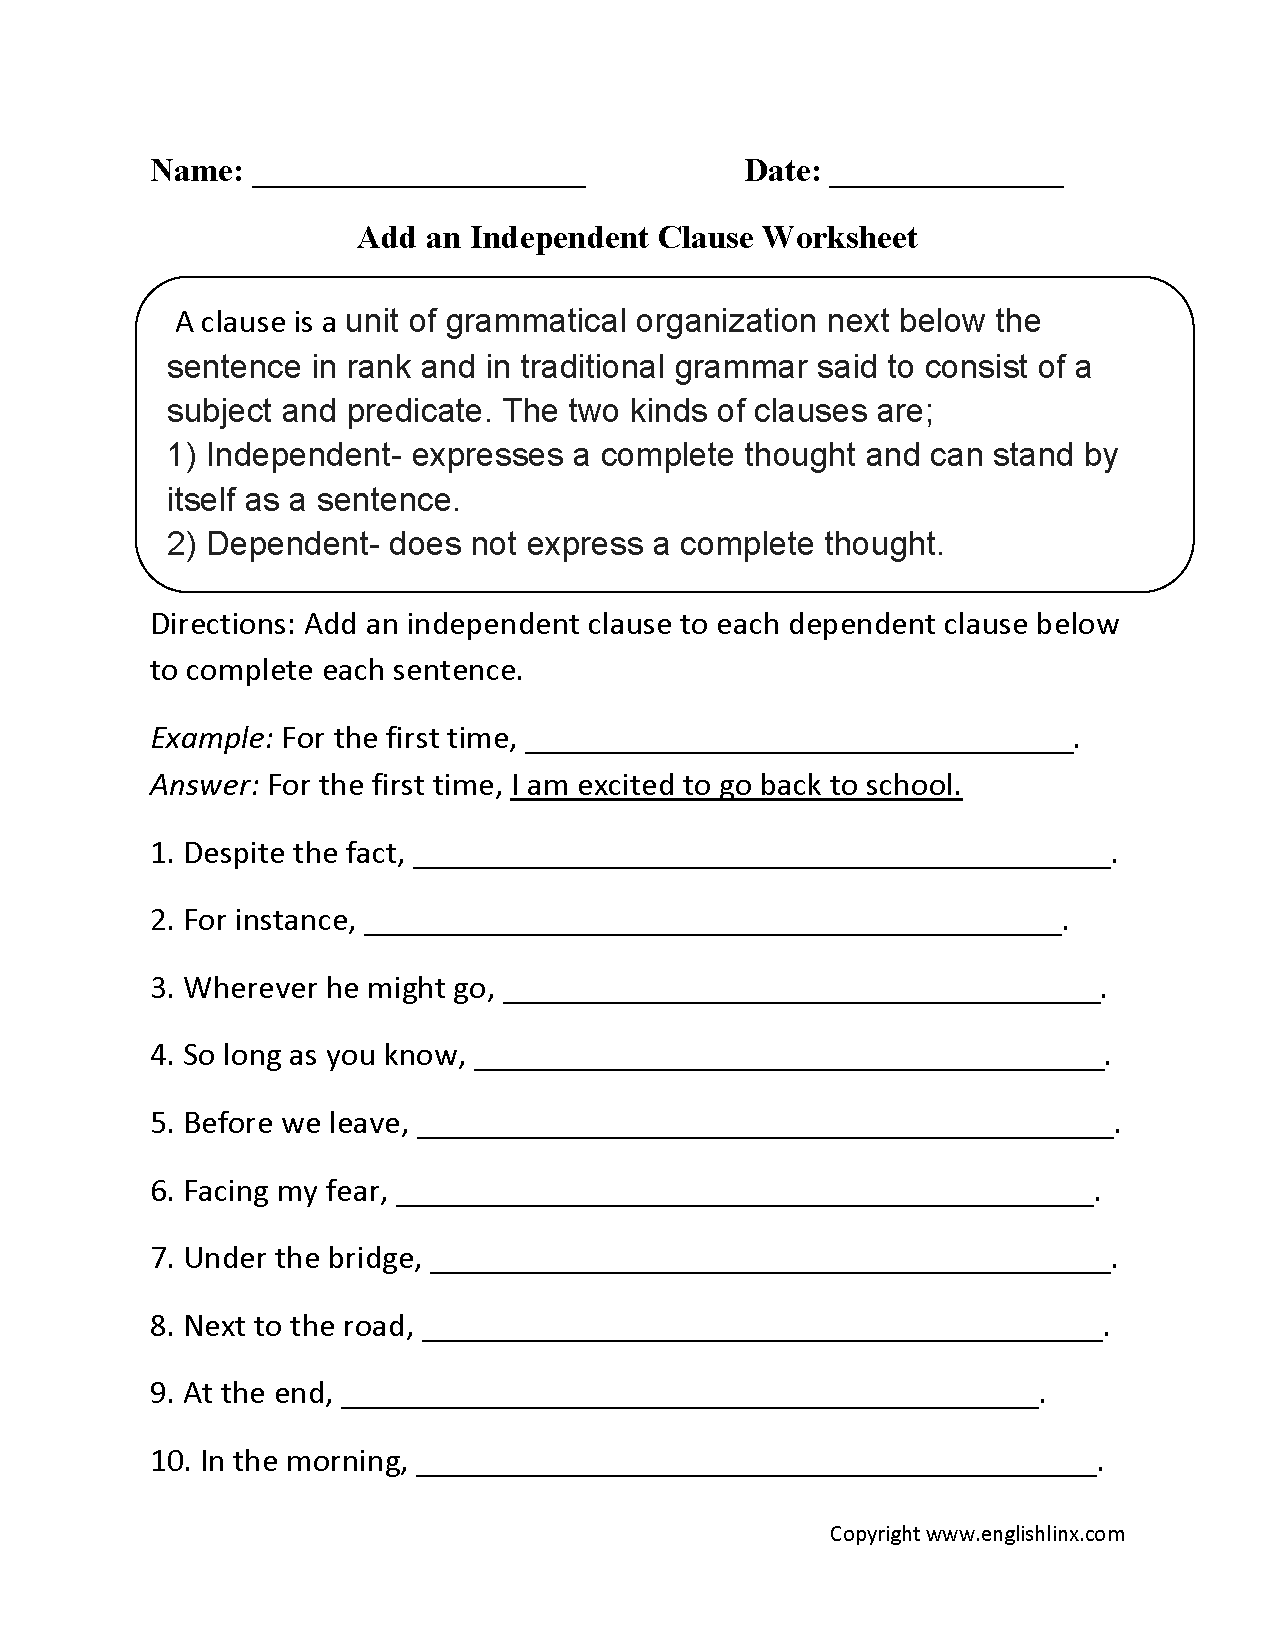 Parts of a Sentence Worksheets | Clause Worksheets